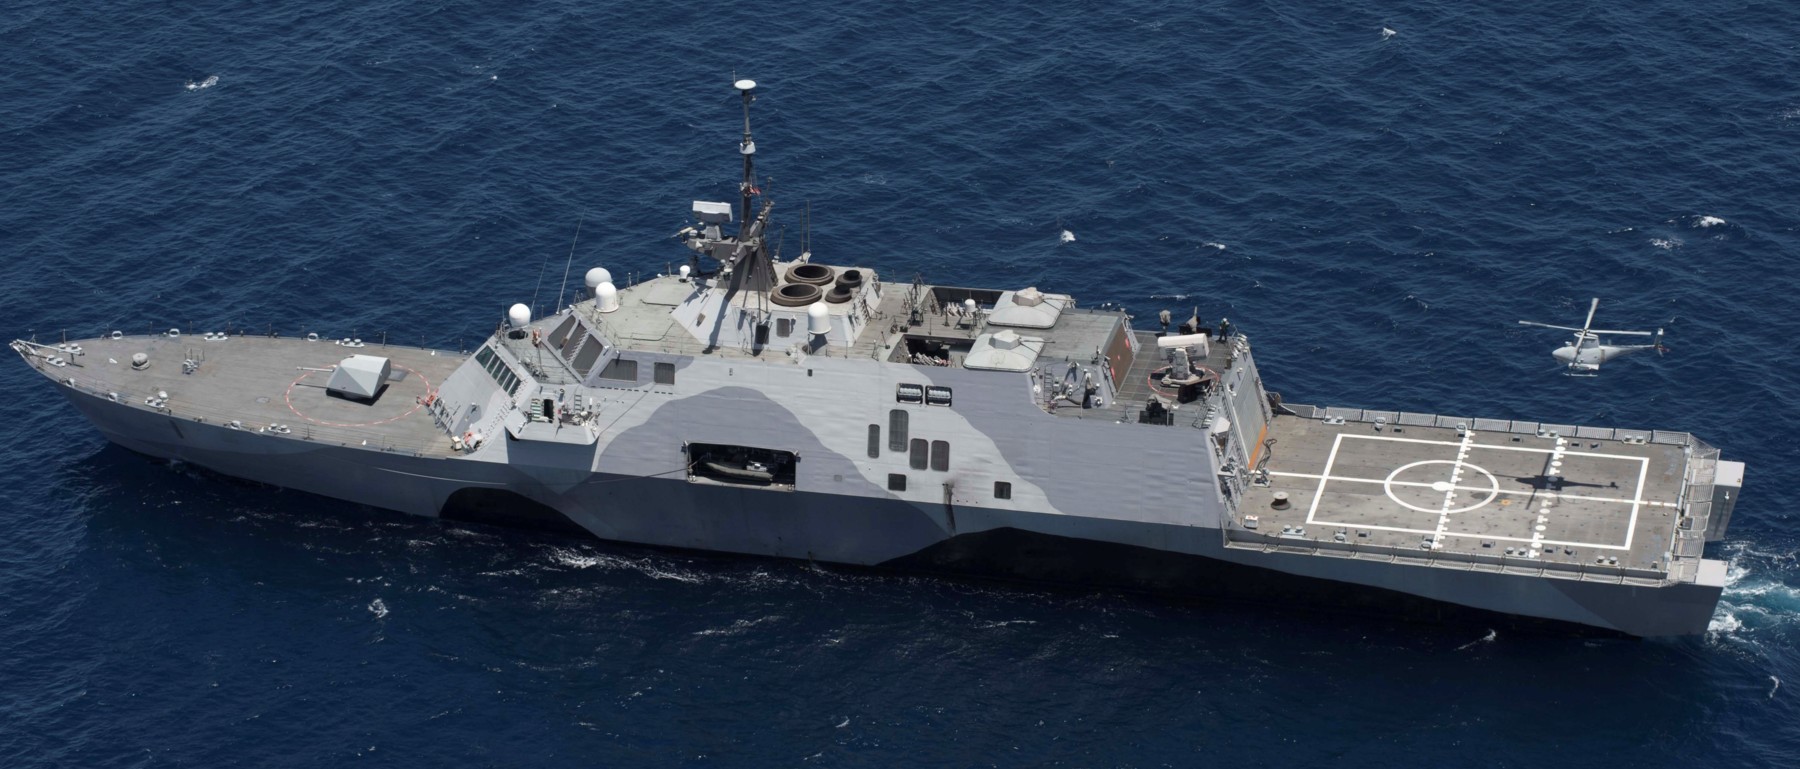 lcs-1 uss freedom class littoral combat ship us navy 05